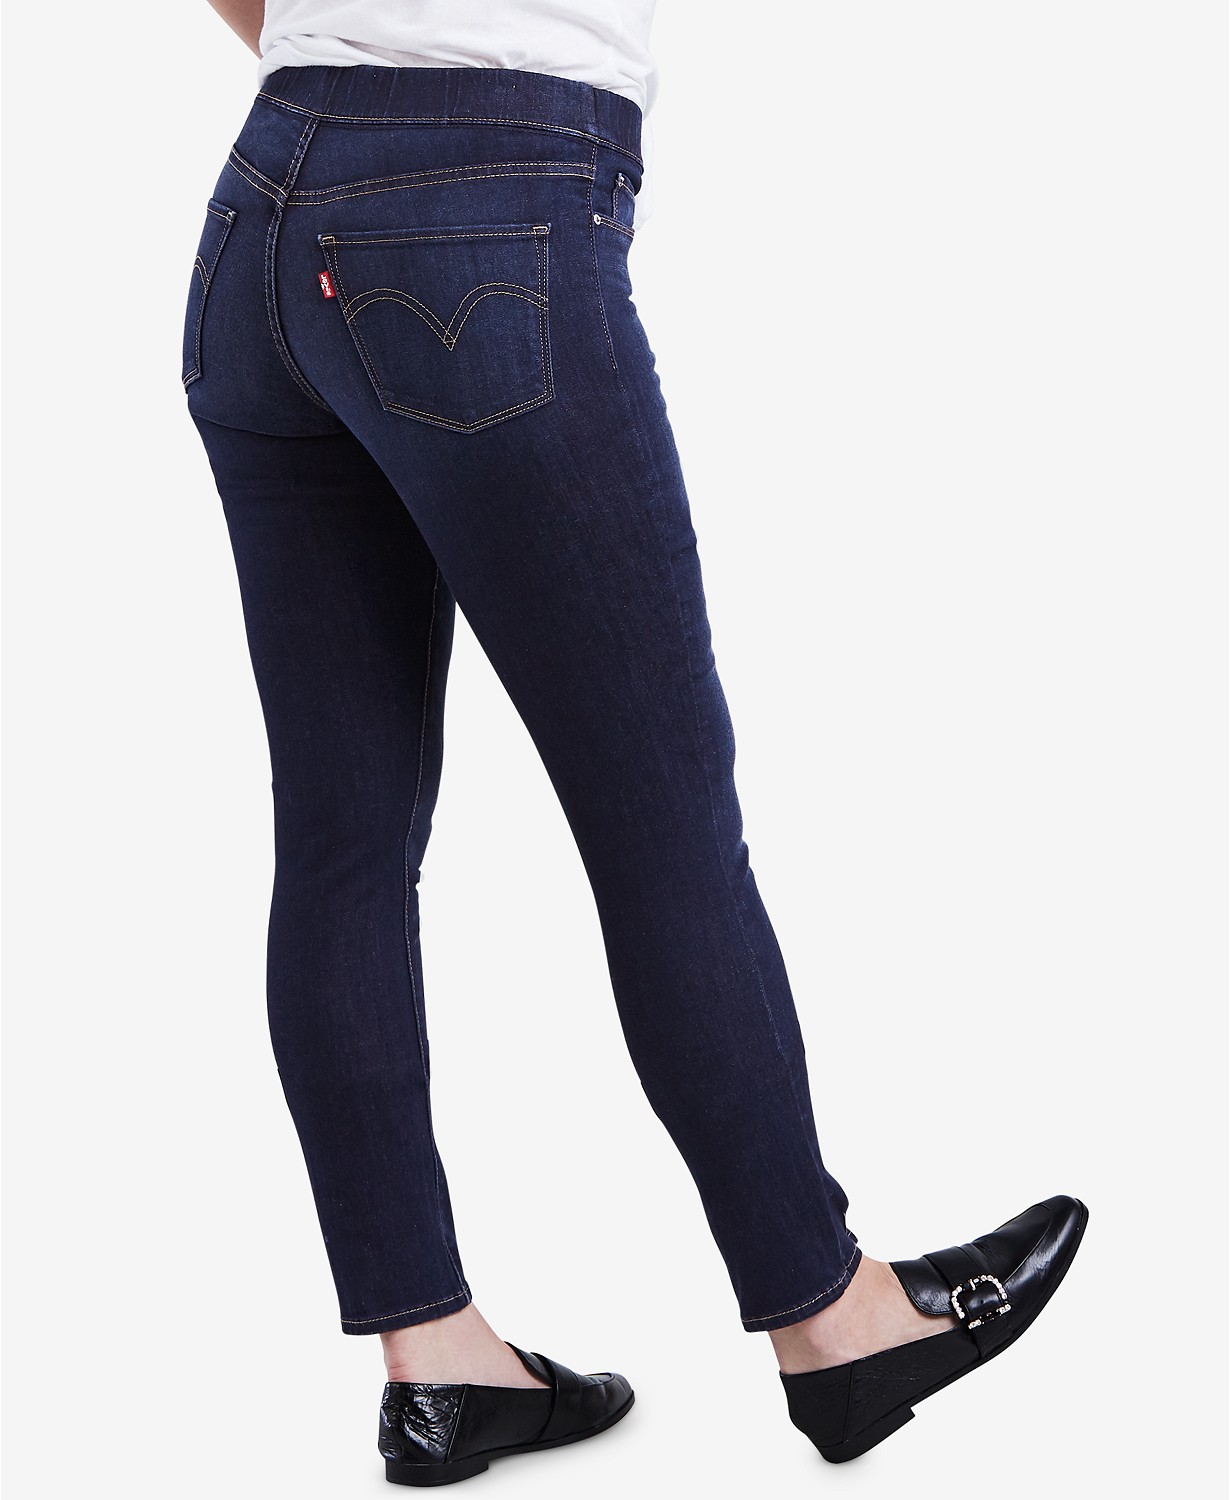 These Levi's Jeggings Look Like Jeans 